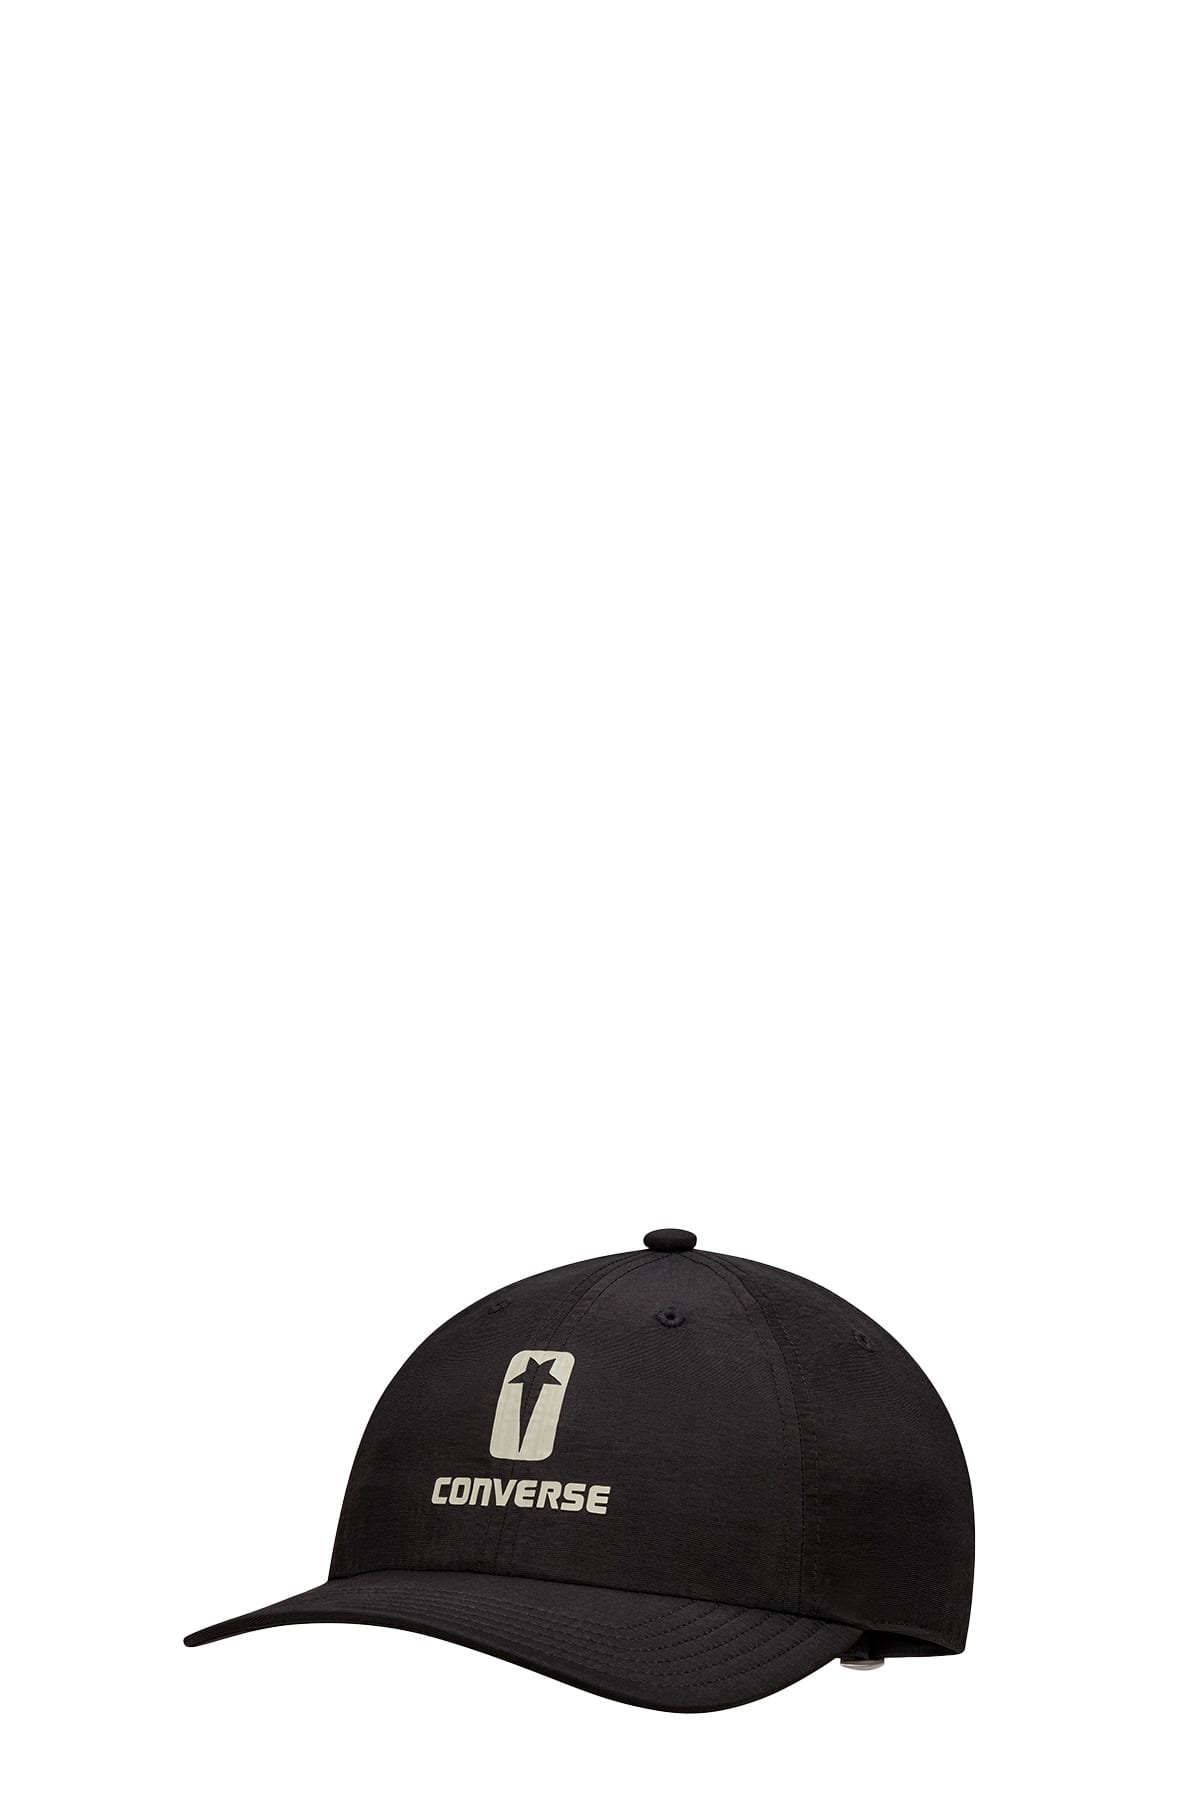 DRKSHDW Performance Cap Black cap in collaboration with Converse - Performance cap